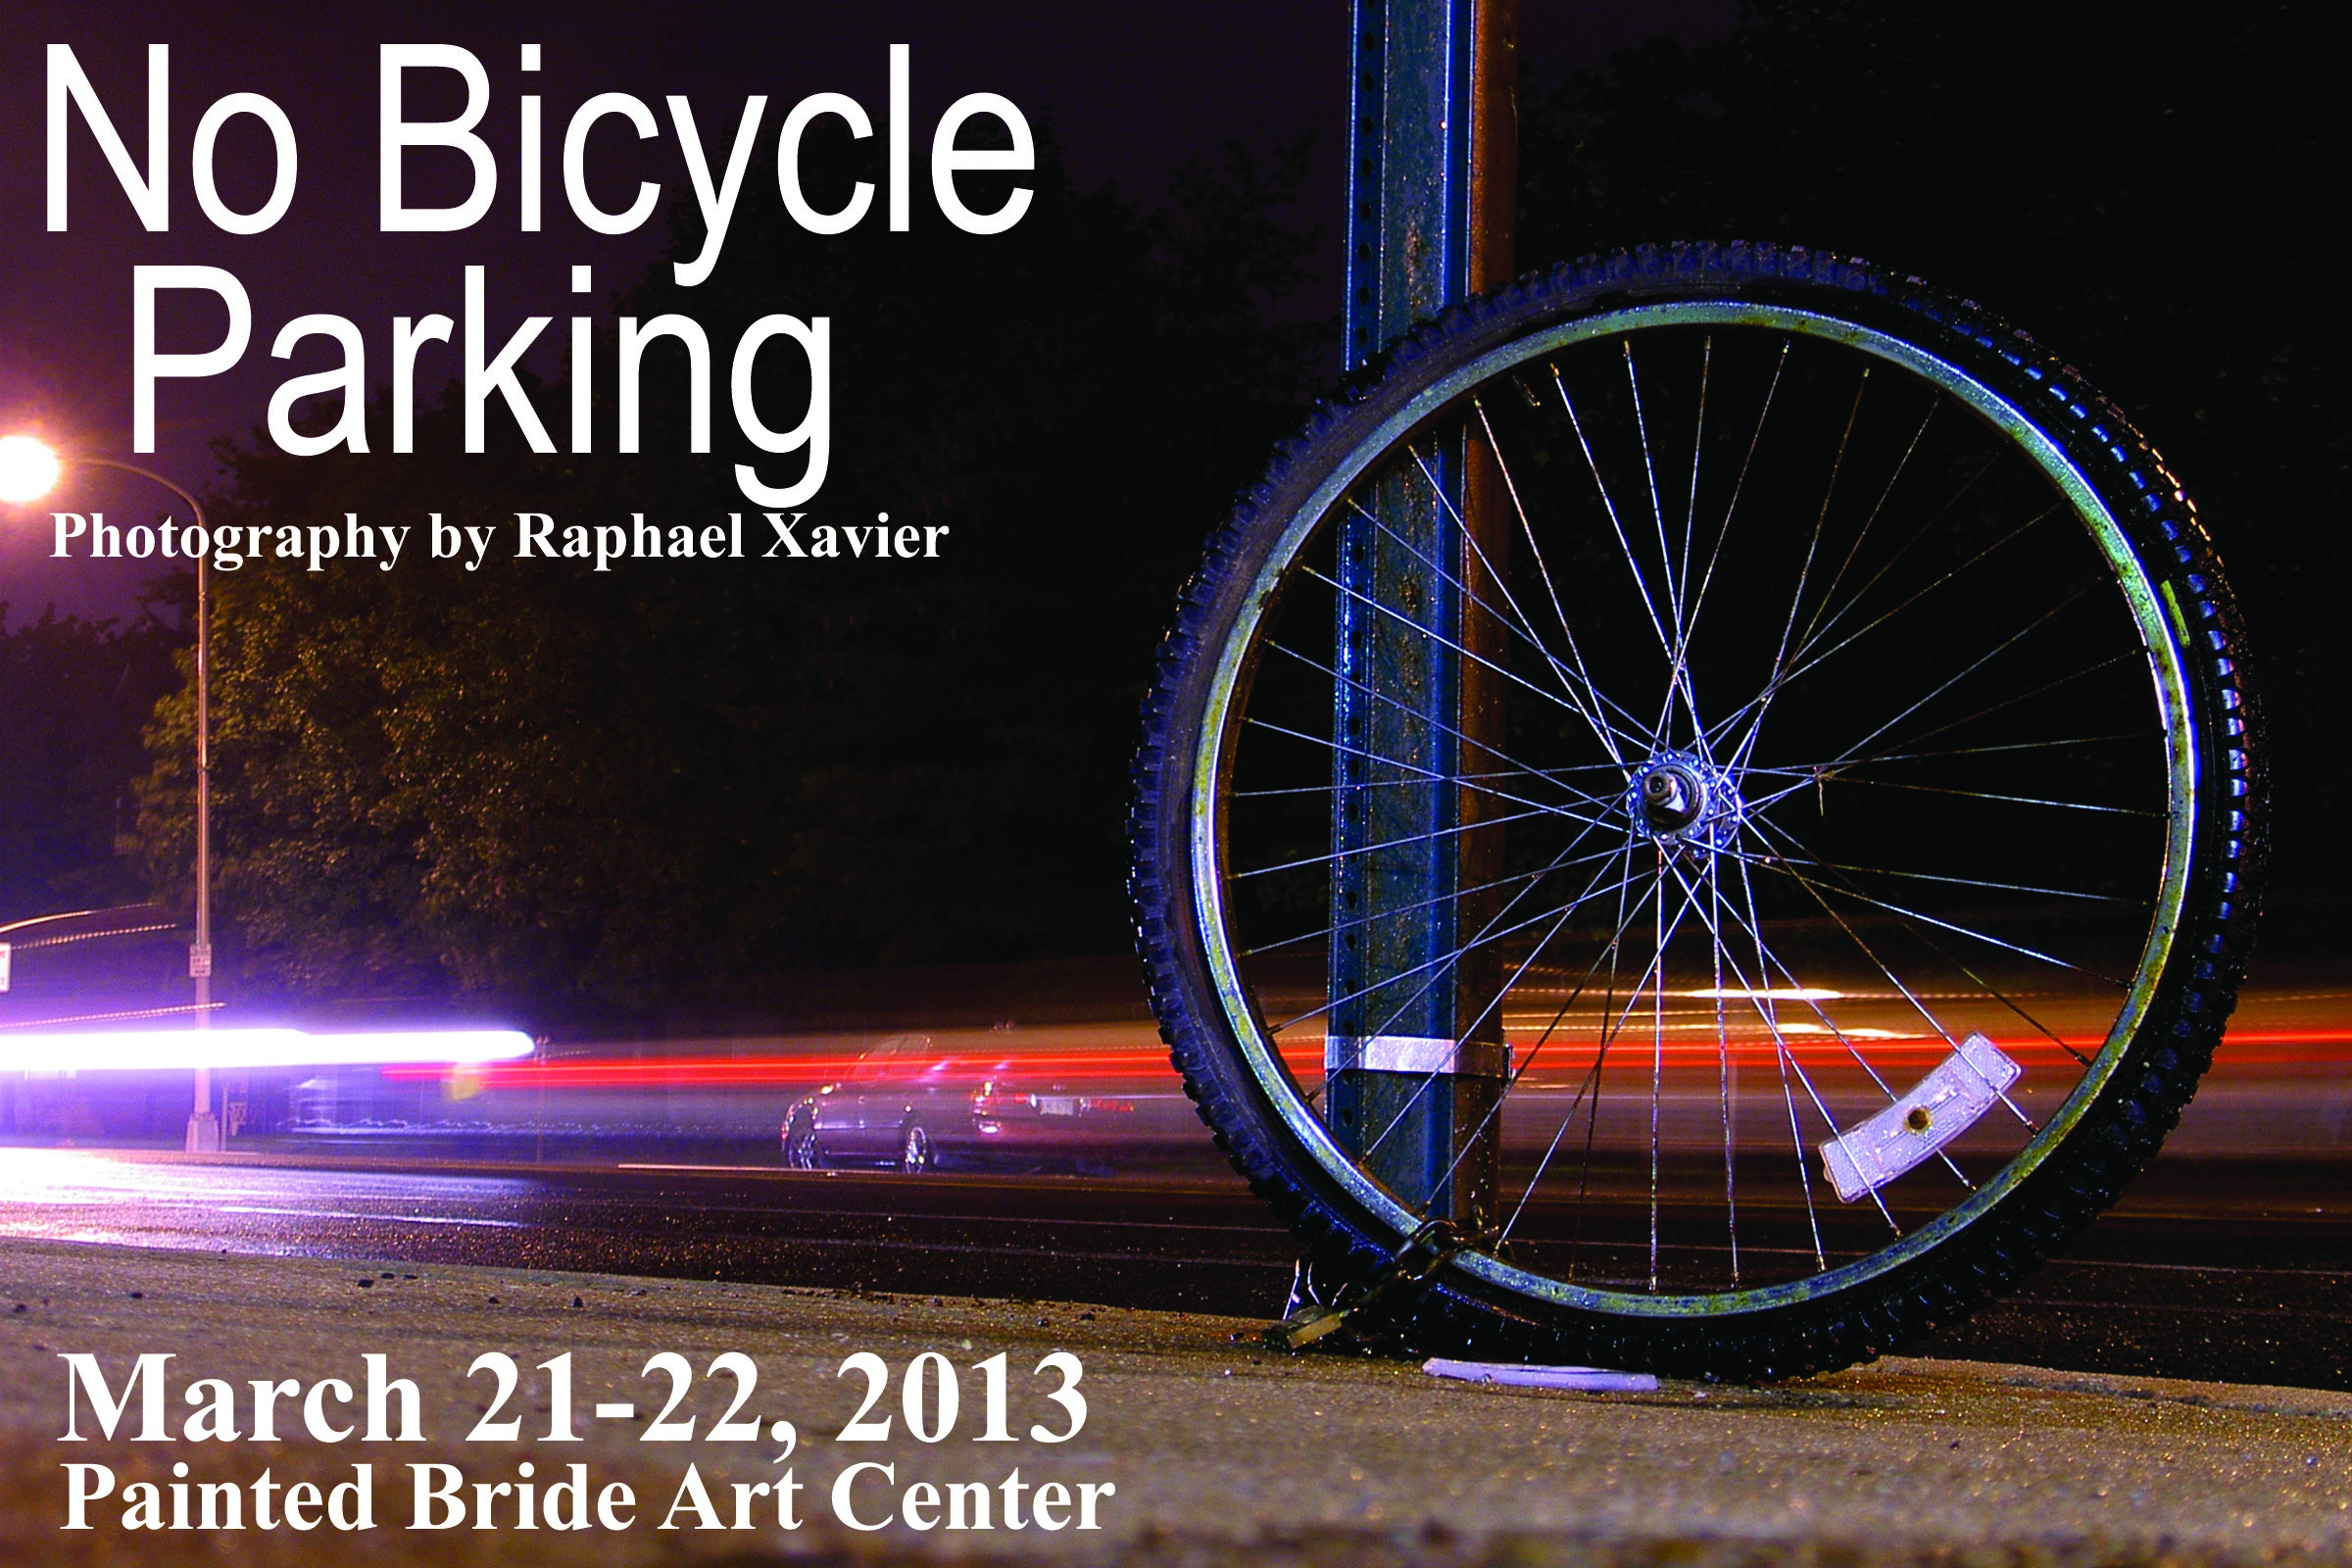 No Bicycle Parking, a photography exhibit by Raphael Xavier, is open March 21-22 and the Painted Bride